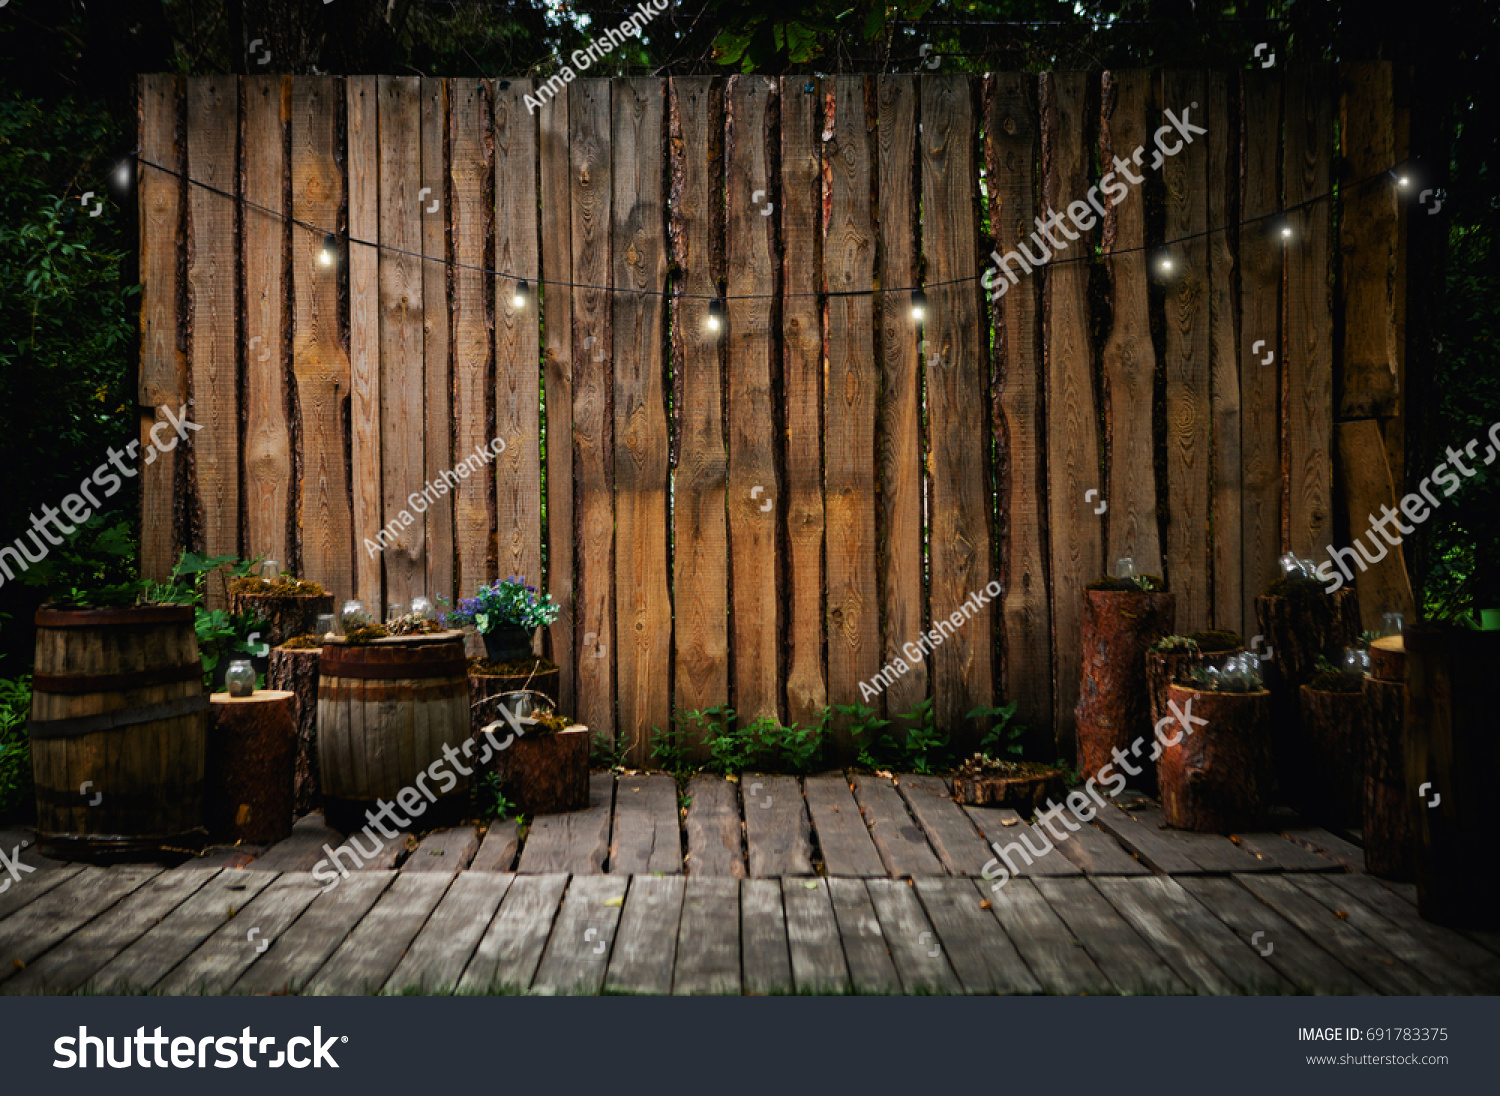 A beautiful recreation area in the park or in the garden. Wooden terrace, rustic loft interior. Retro garland with luminous bulbs, decorated pots with flowers and candles #691783375